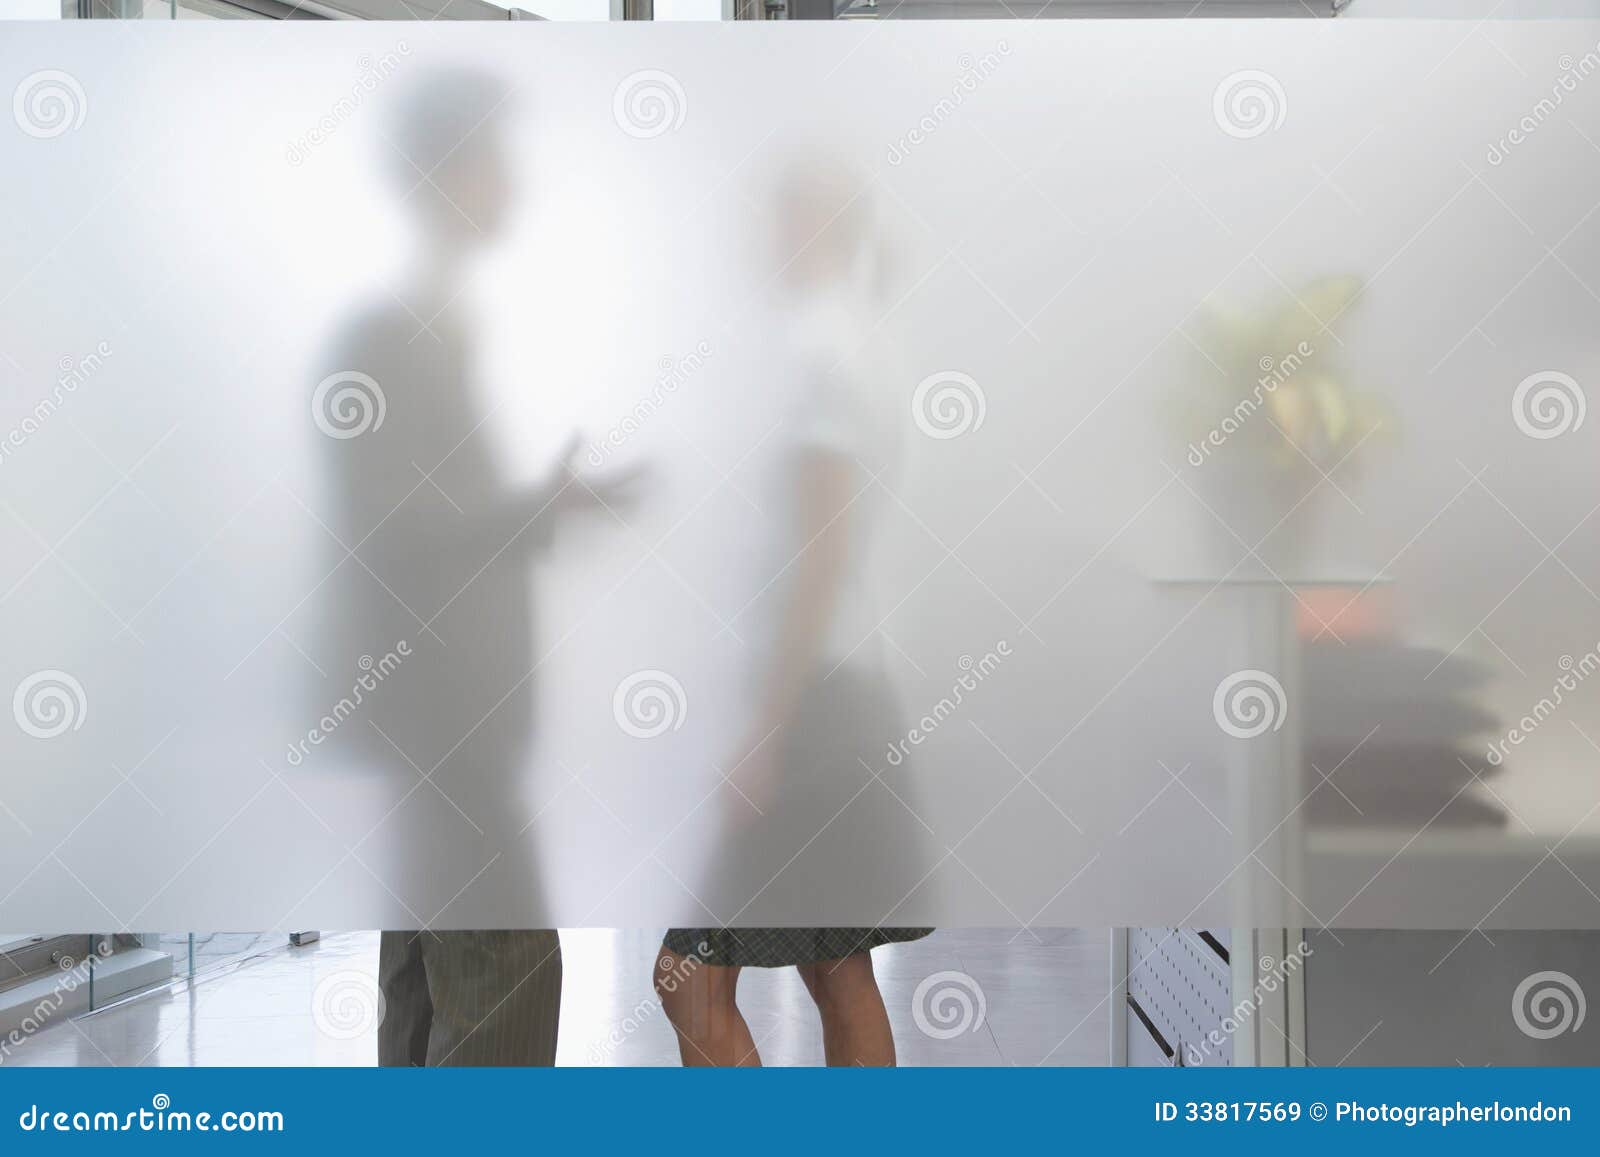 male executive talking to female colleague behind translucent wa